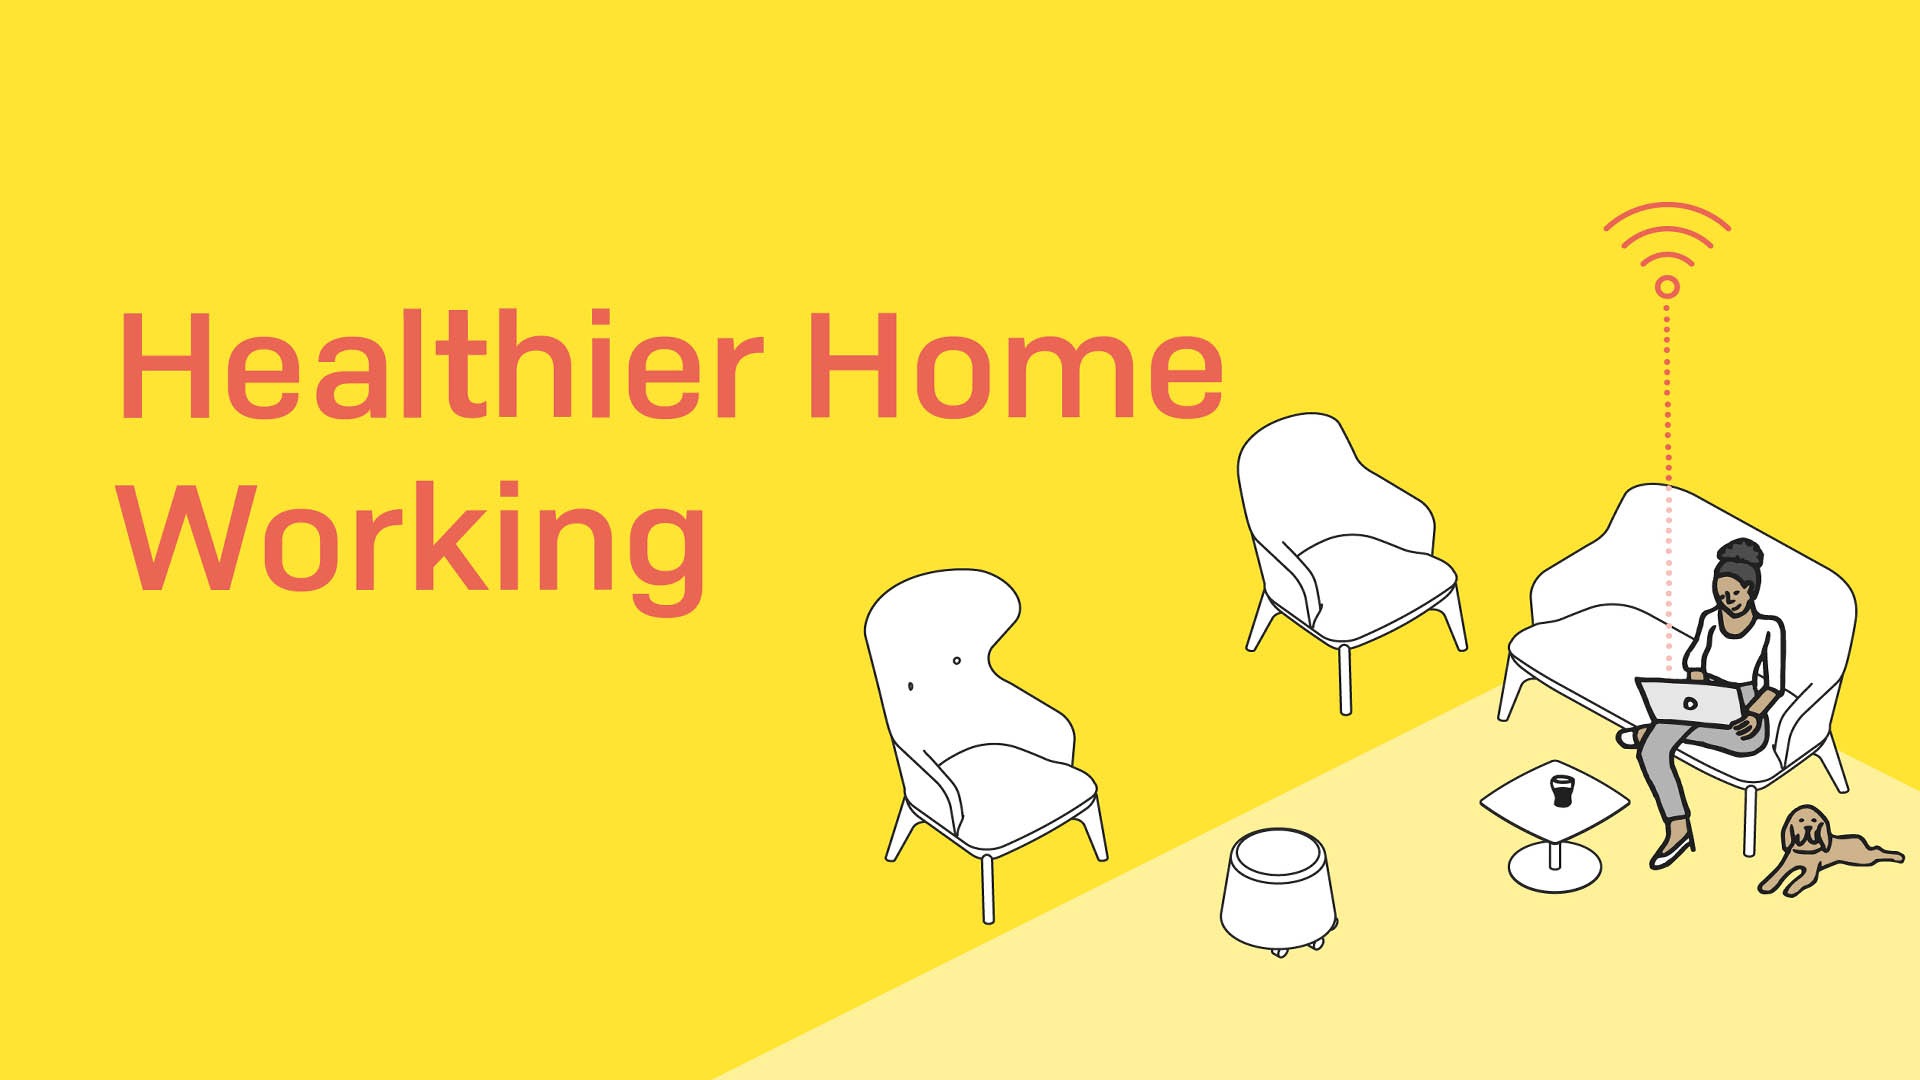 Healthier Home Working cover